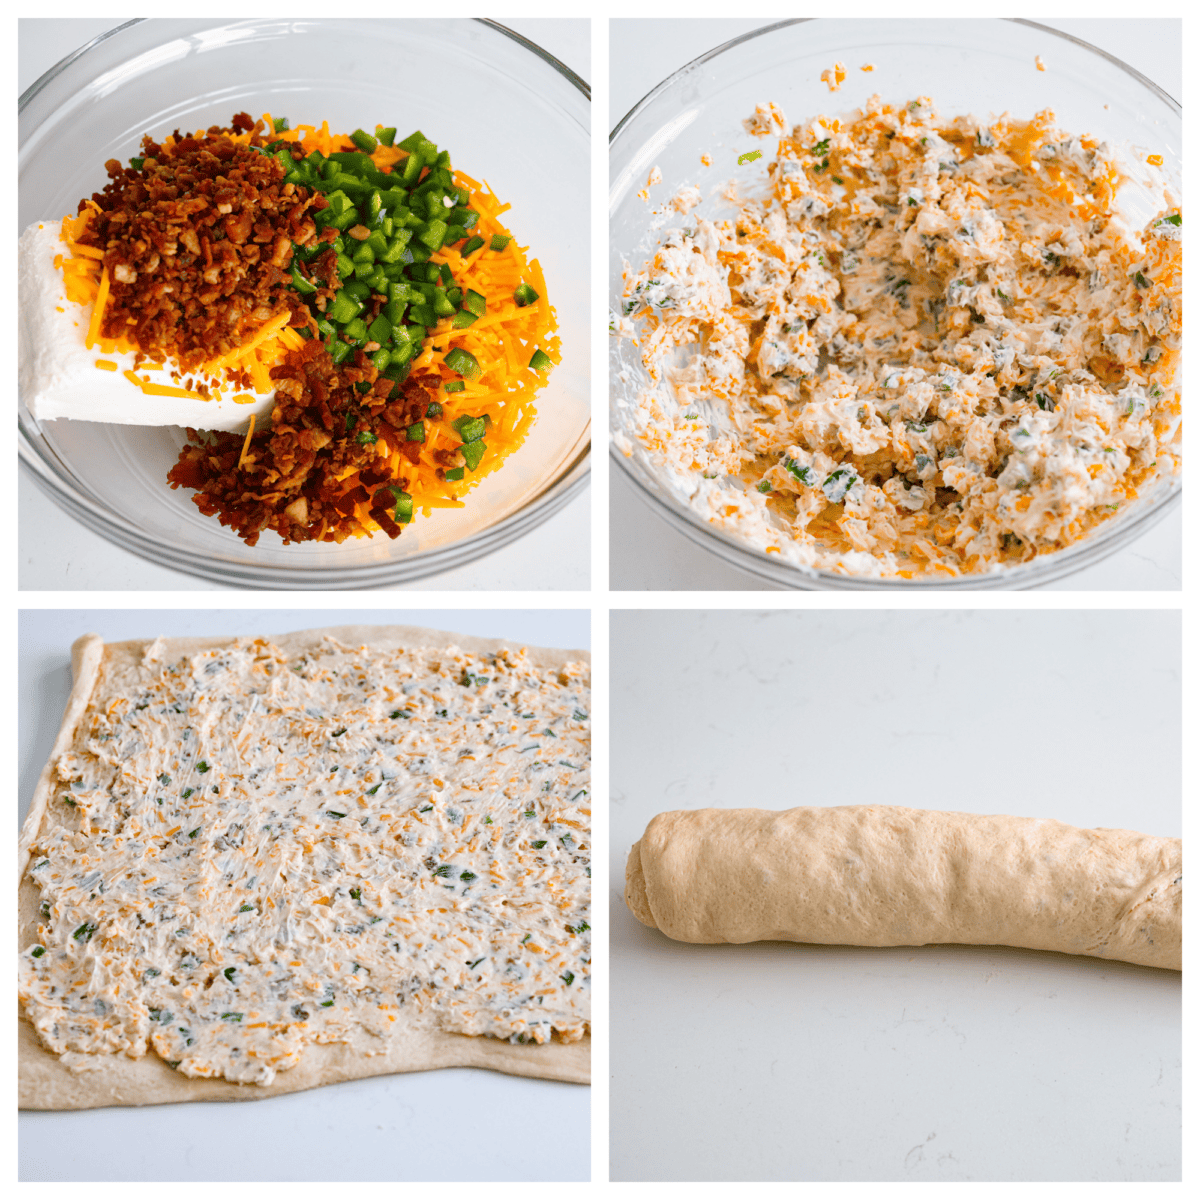 First photo of cream cheese mixture ingredients added to a bowl. Second photo of the cream cheese jalapeno mixture mixed in a bowl. Third photo of the mixture spread on crescent dough. Fourth photo of the dough rolled up into a log before it's cut.